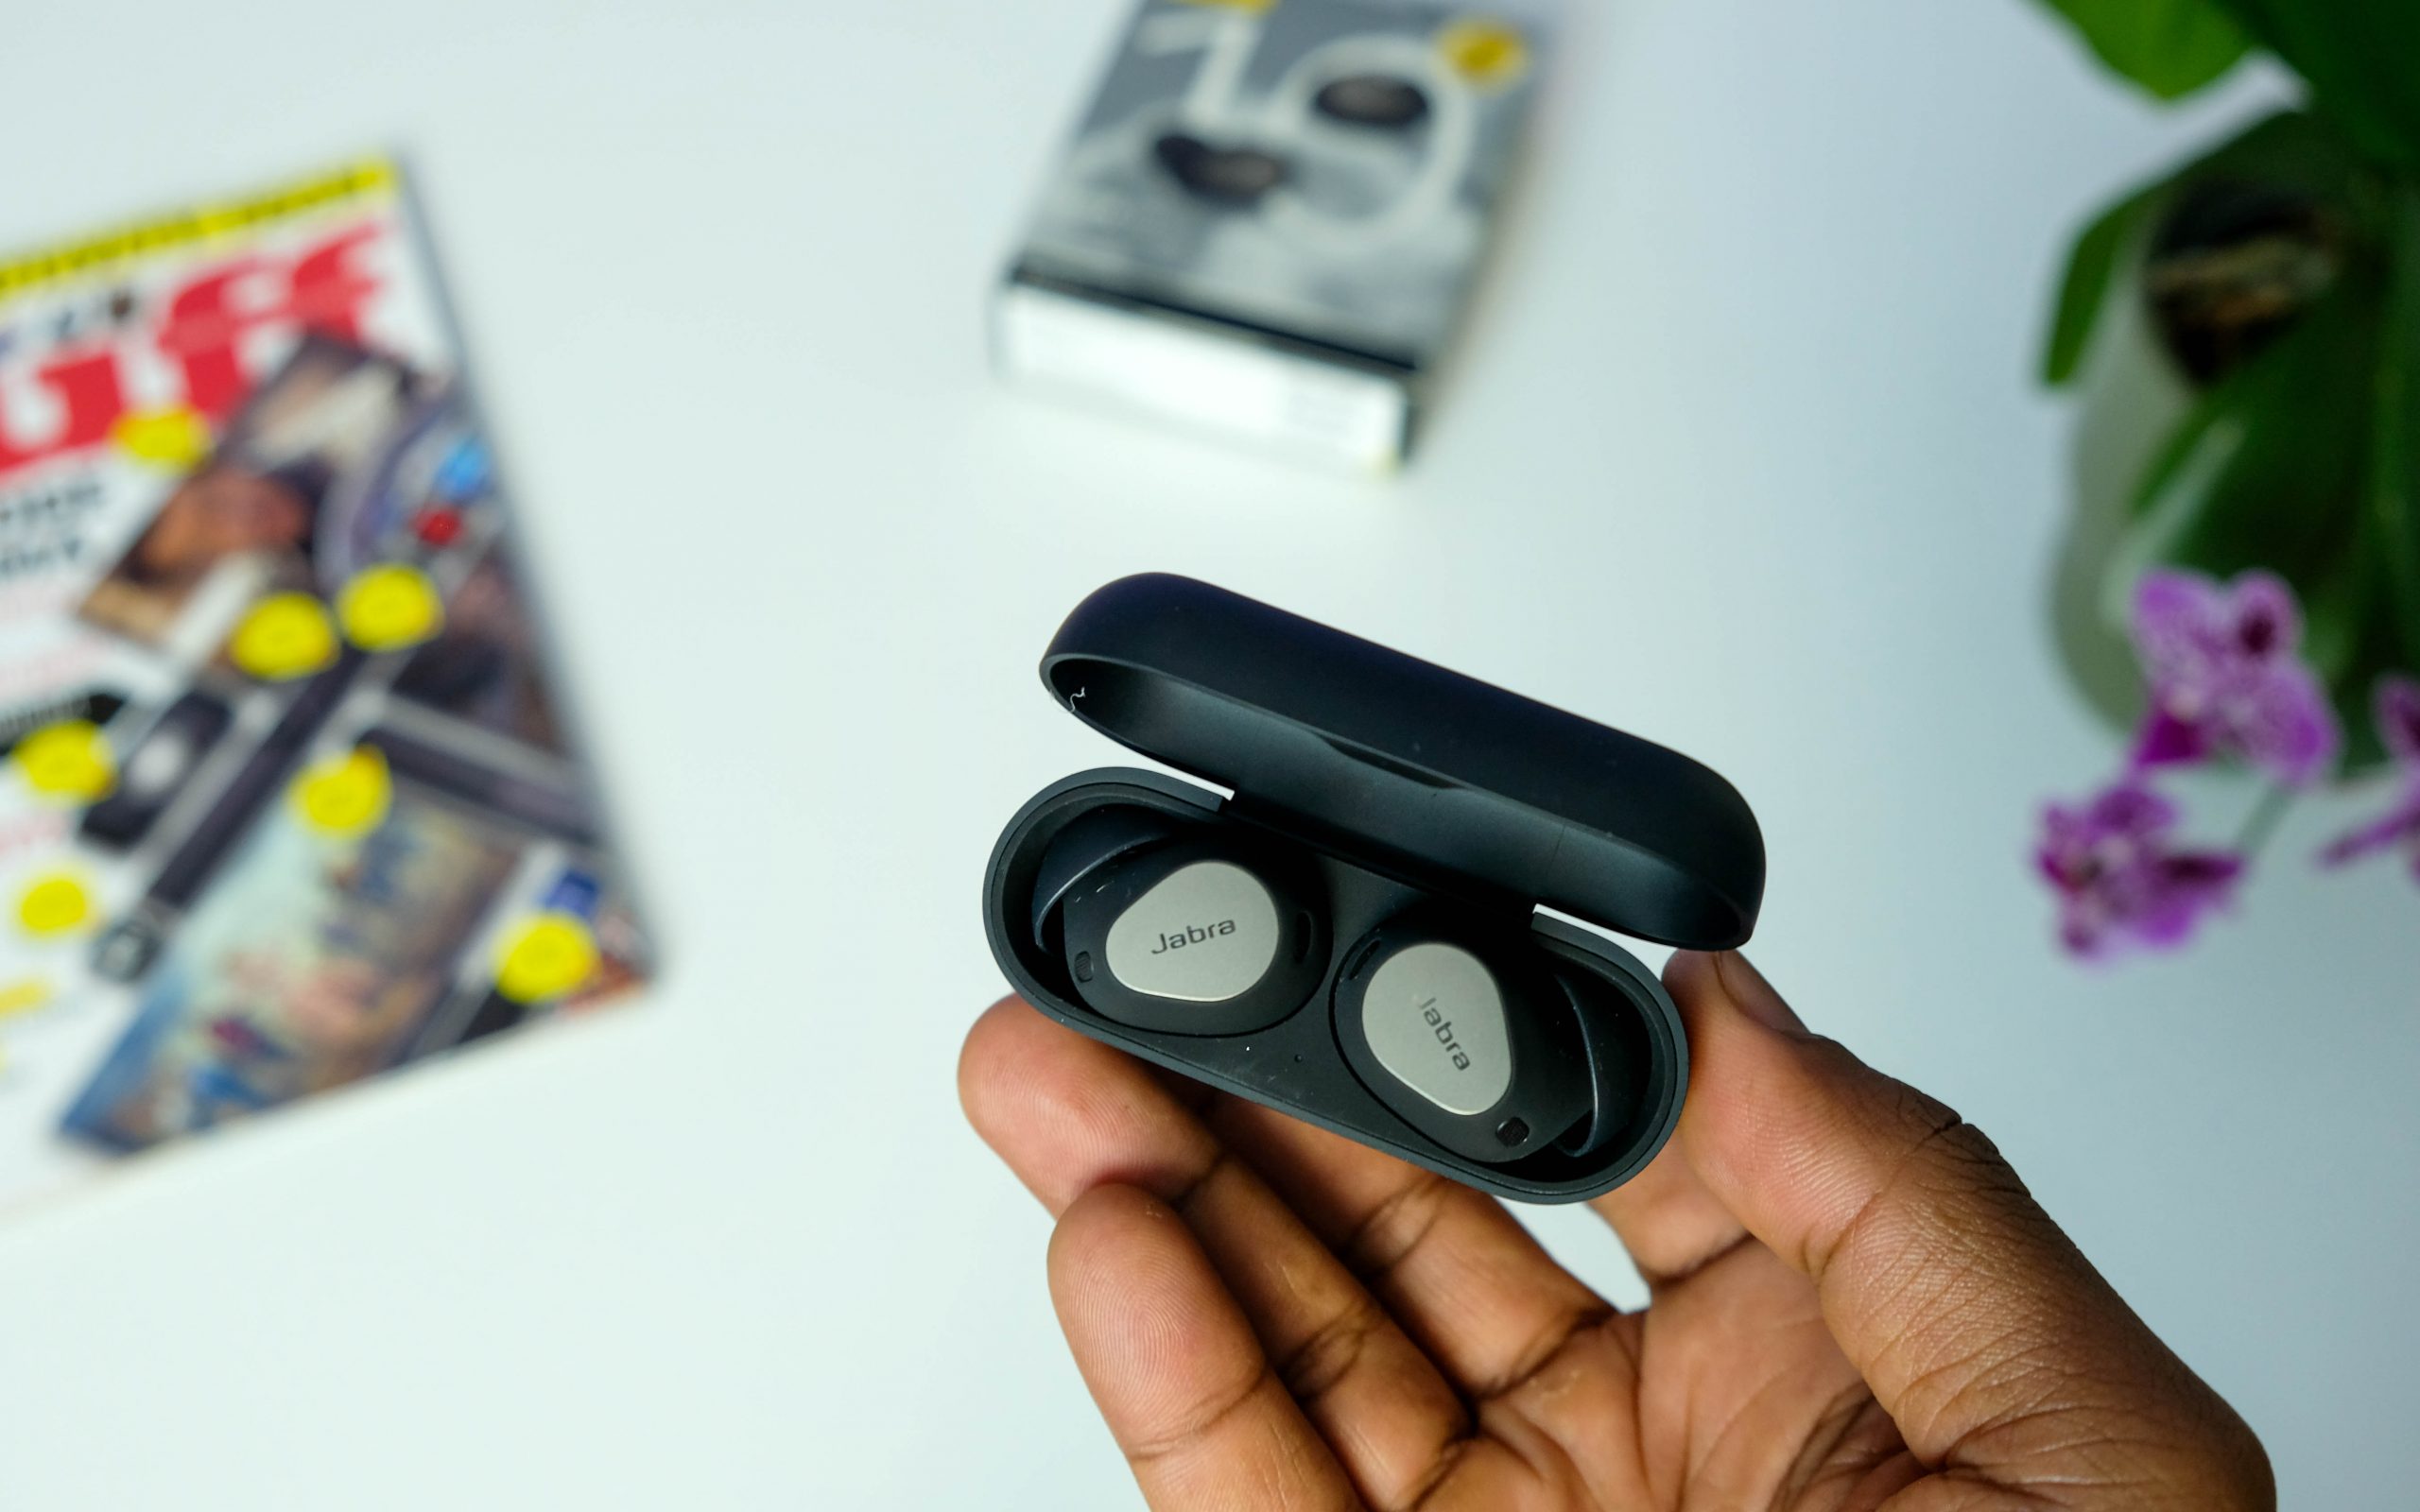 Jabra's Elite 10 are its first wireless earbuds to feature Dolby Atmos